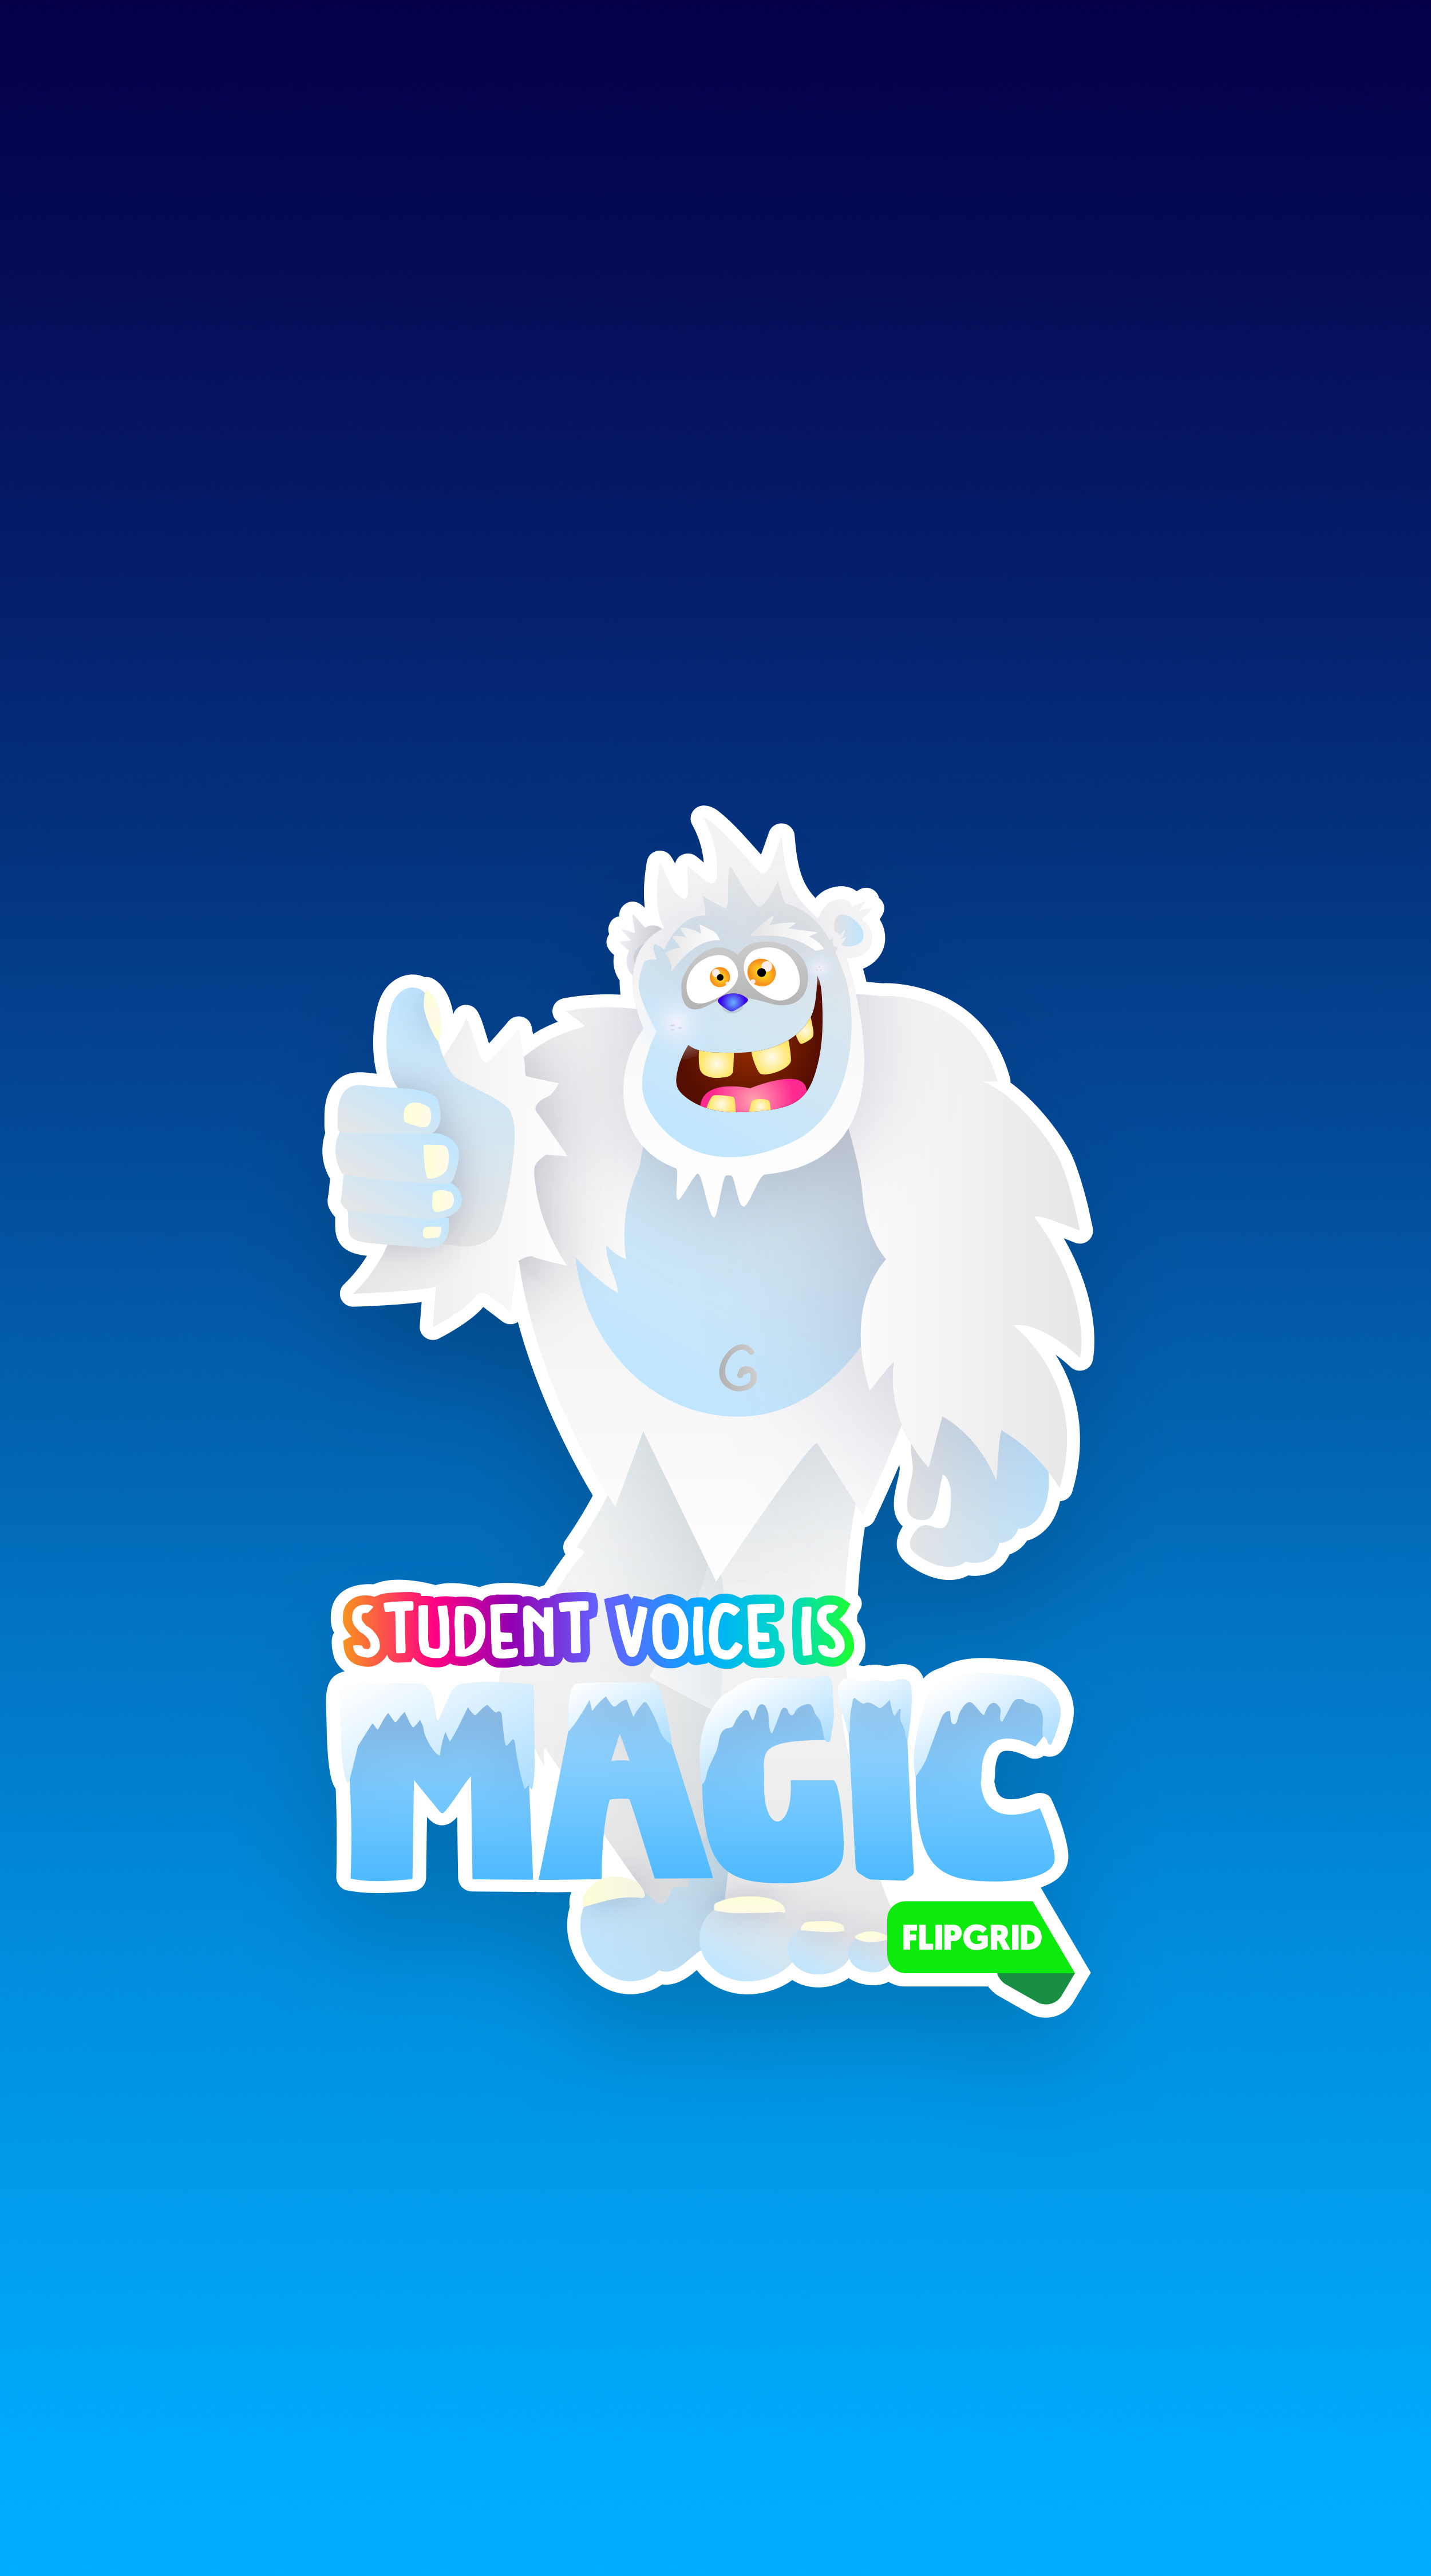 Share With Your Students And Staff To Spread The Magic - Illustration , HD Wallpaper & Backgrounds